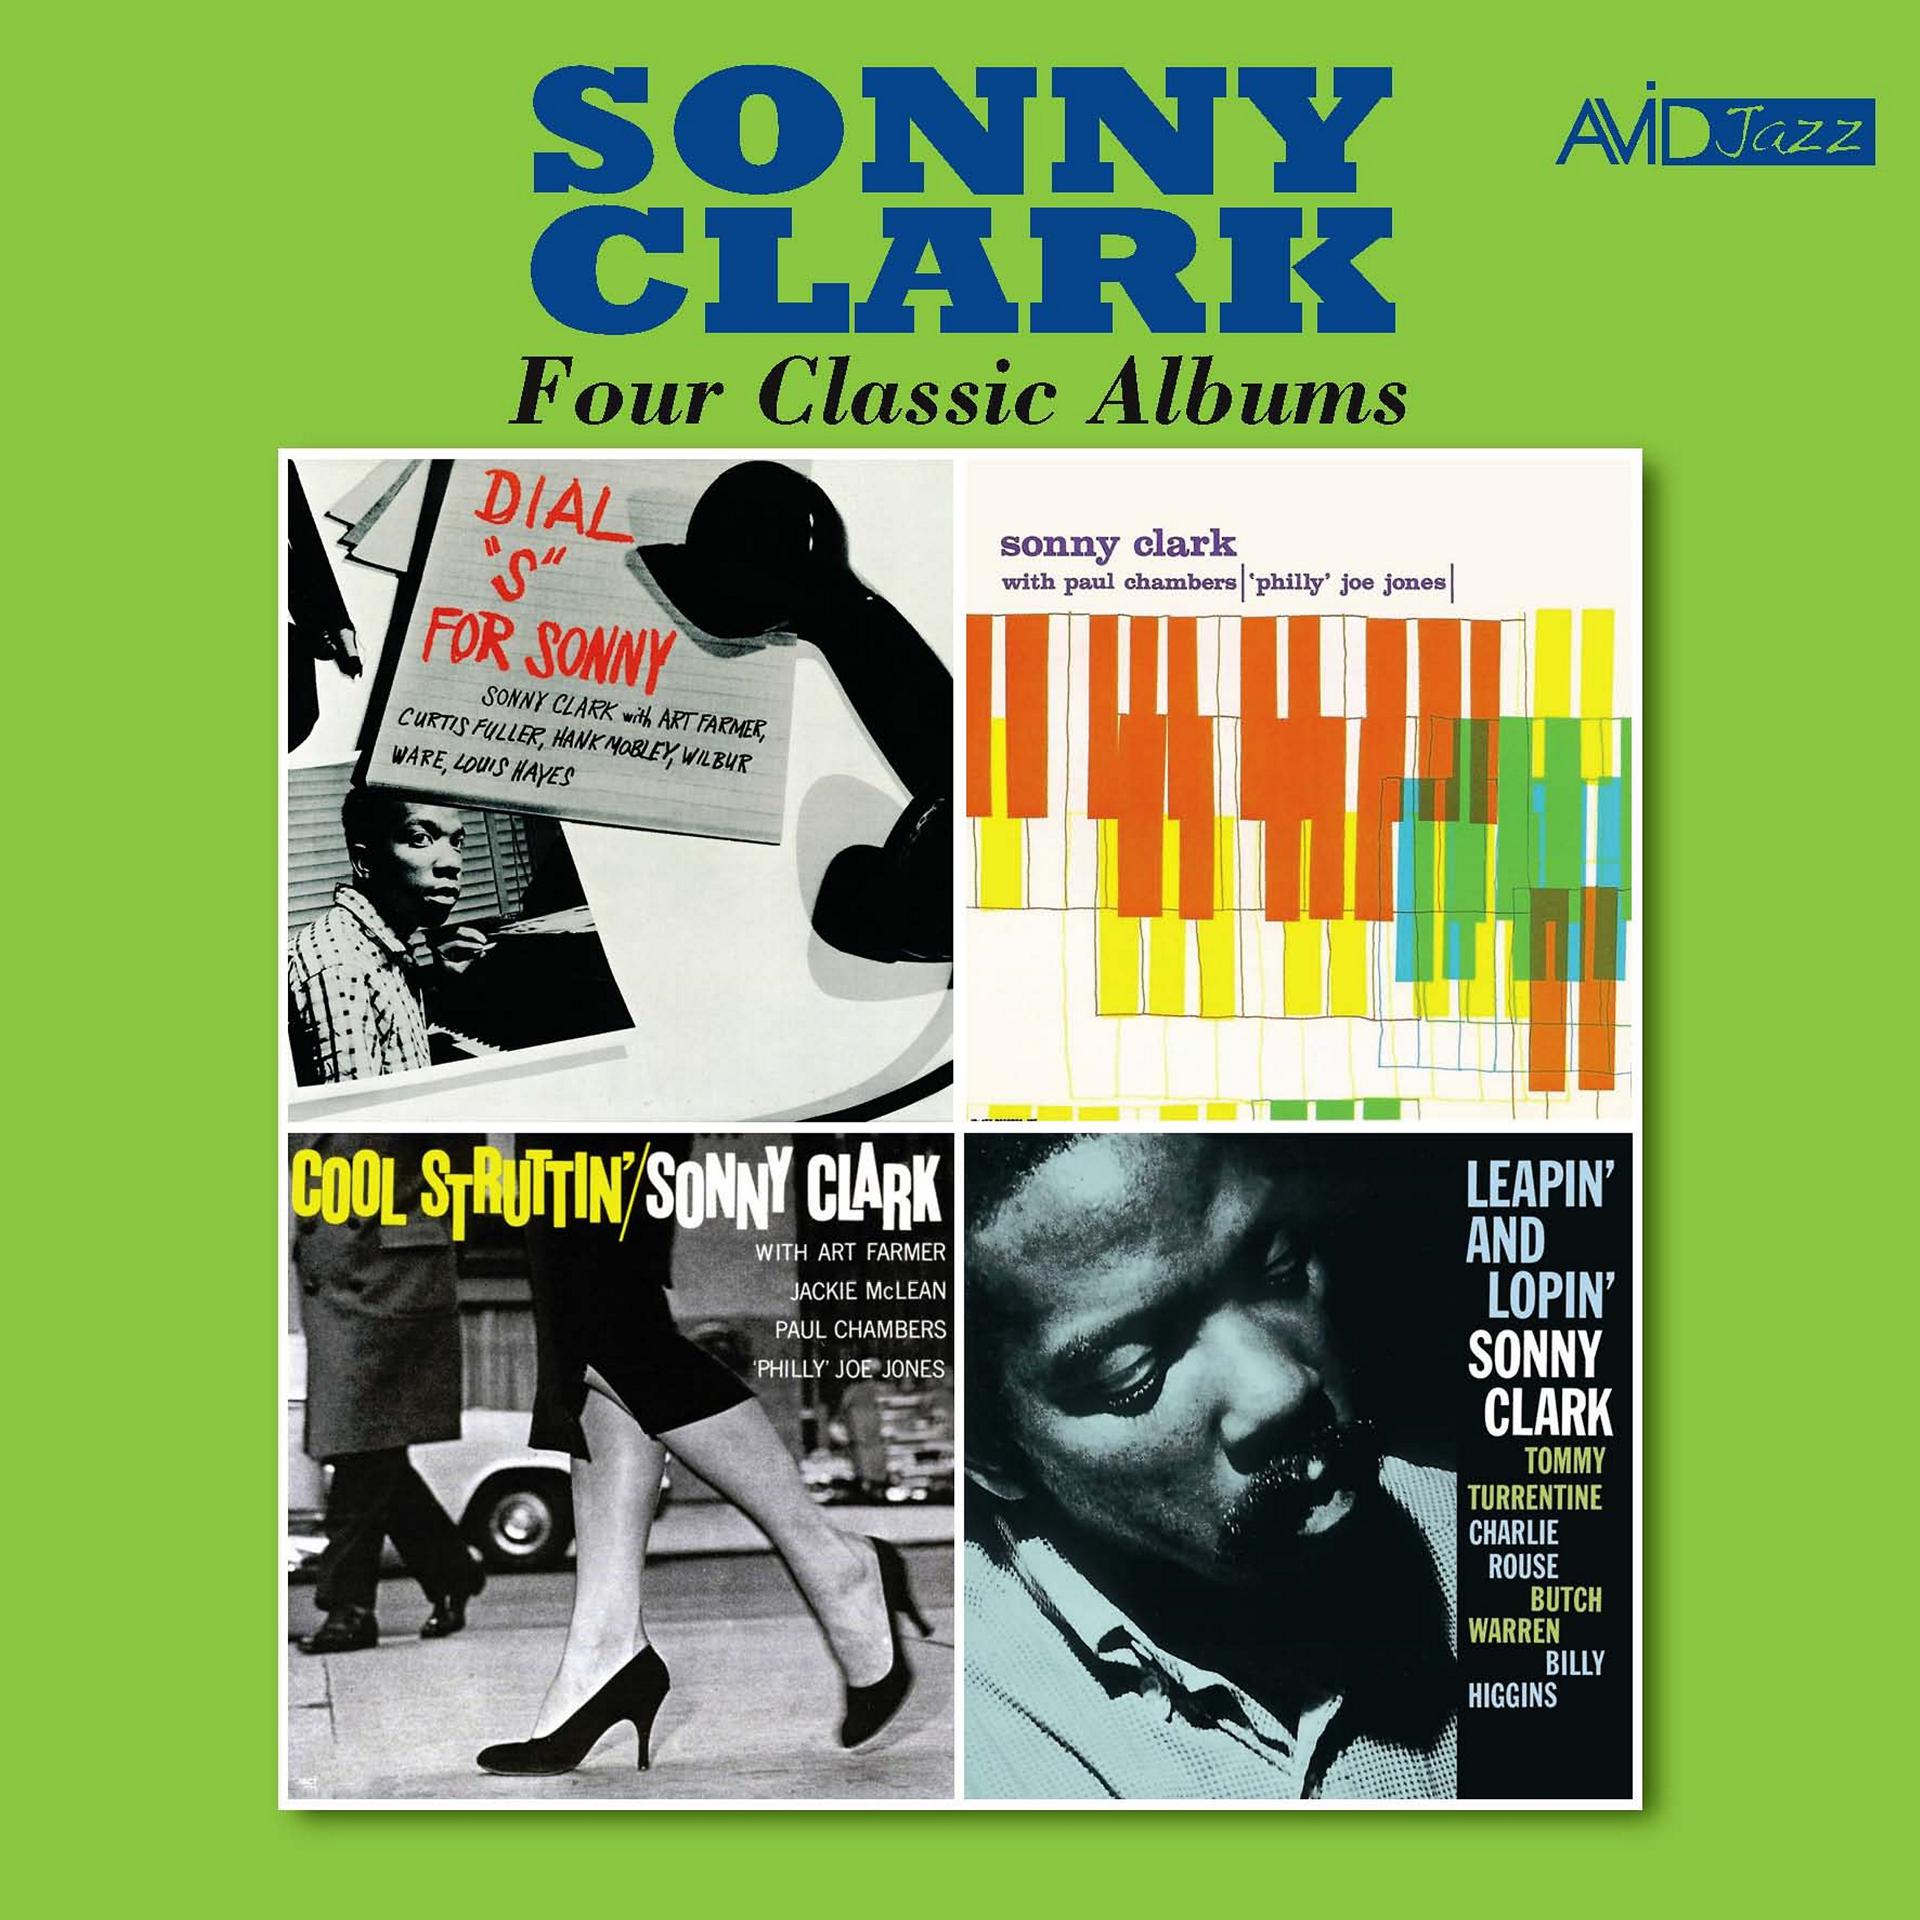 Постер альбома Four Classic Albums (Dial "S" For Sonny / Sonny Clark Trio / Cool Struttin' / Leapin' and Lopin') [Remastered]